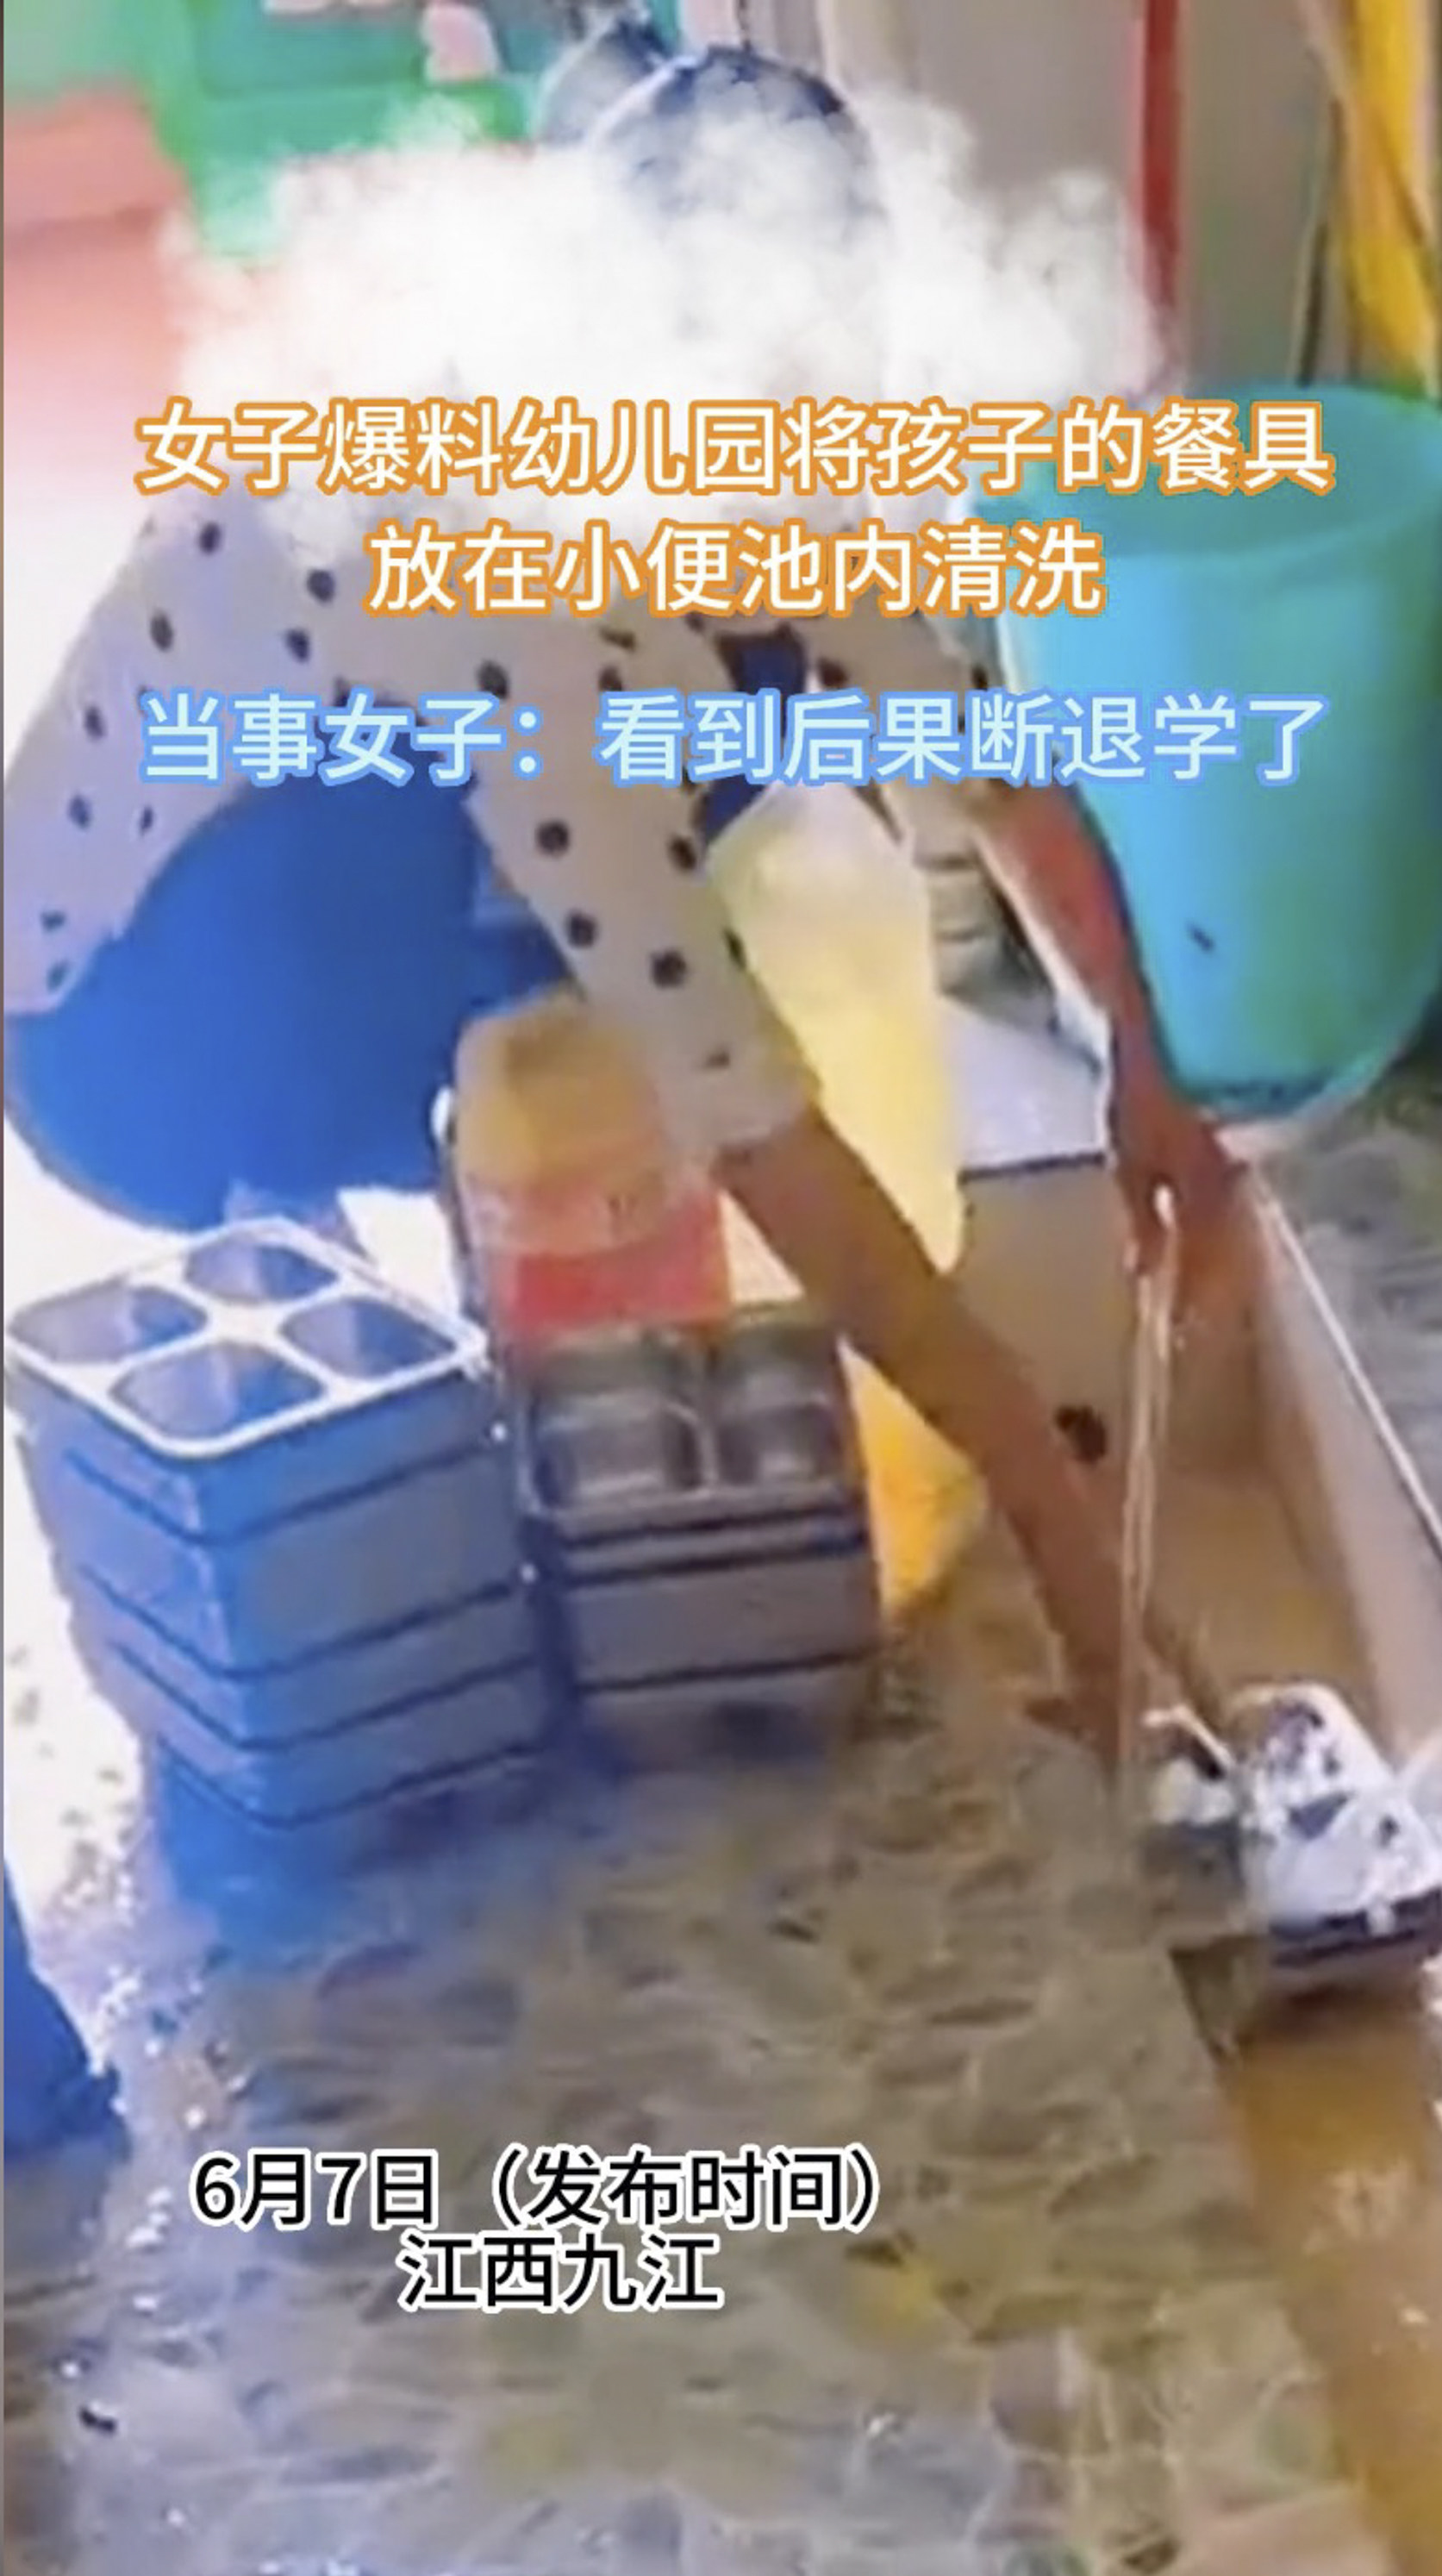 Local authorities say the school remains closed while a probe is conducted with management and the worker in the video being investigated. Photo: Douyin